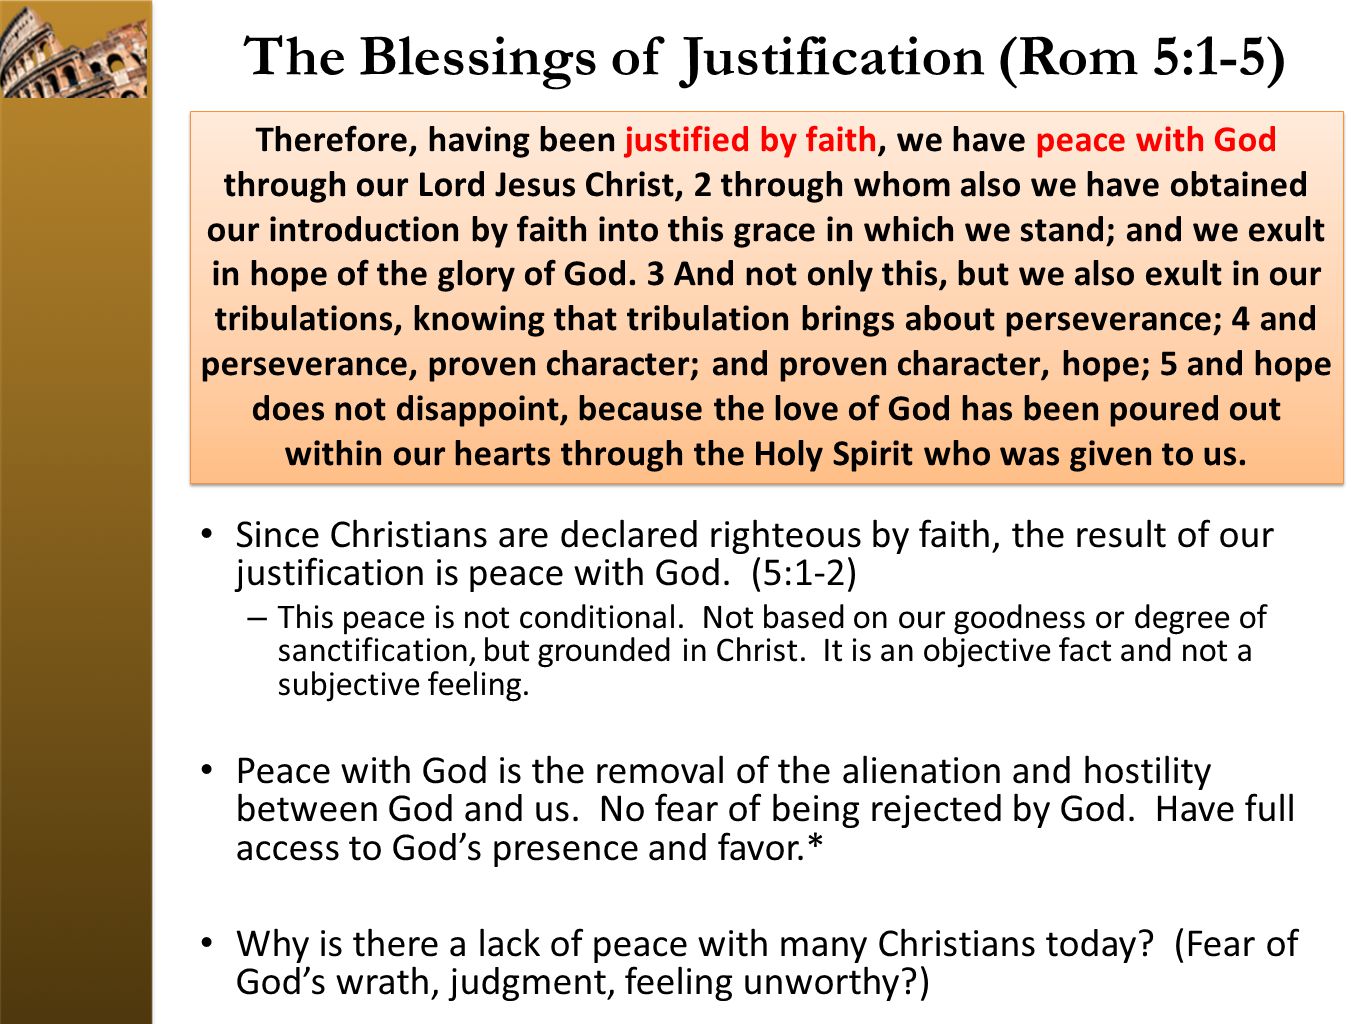 The Blessings of Justification (Rom 5:1-5) Since Christians are declared righteous by faith, the result of our justification is peace with God.